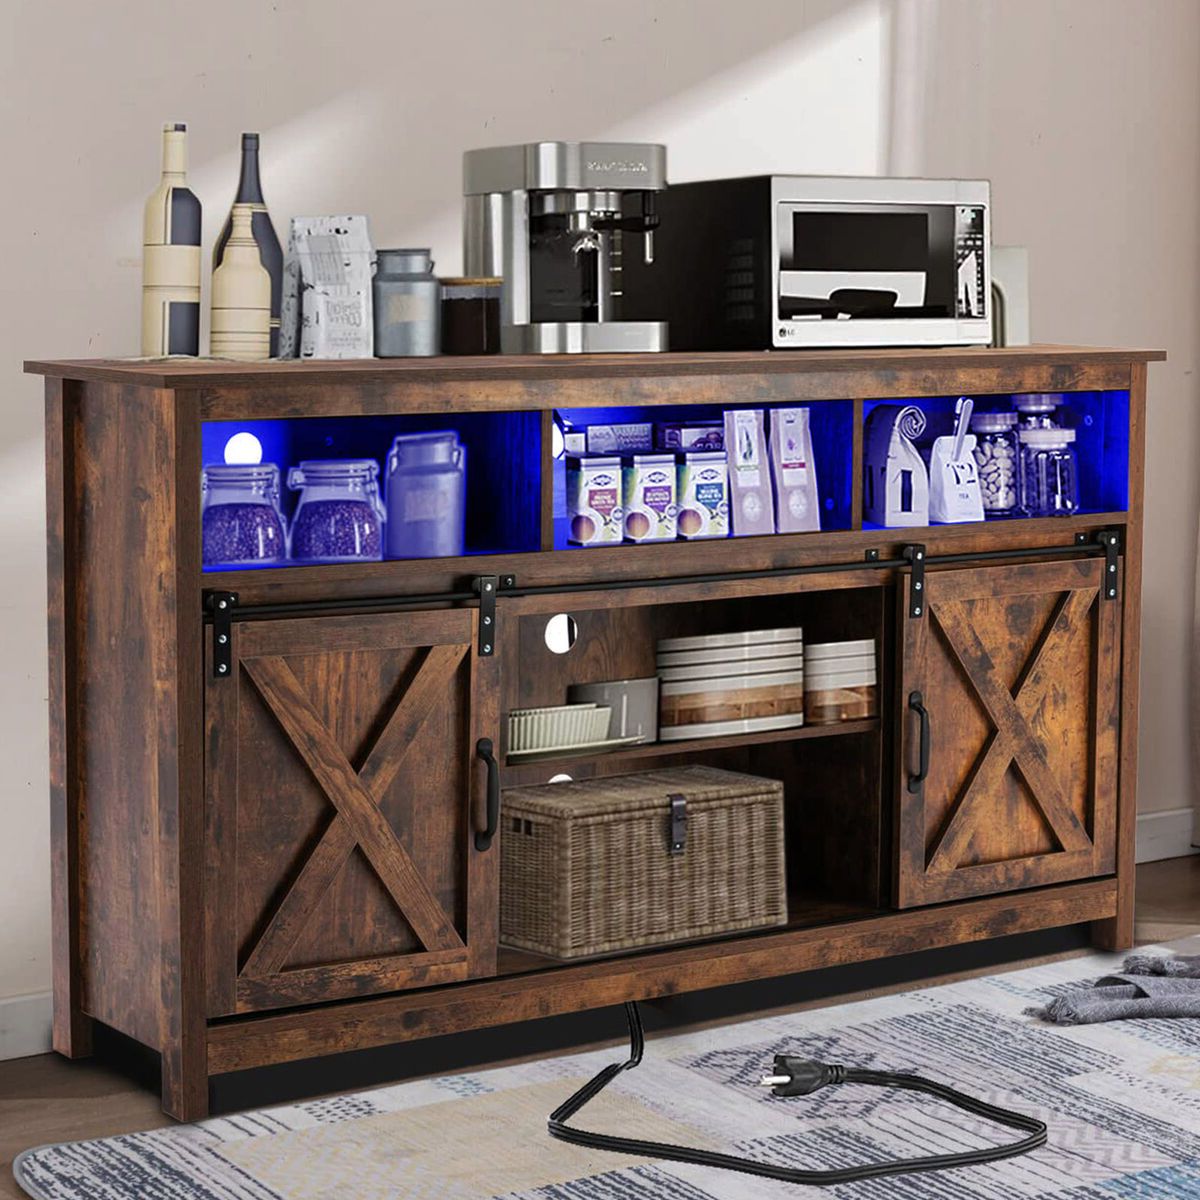 2019 Farmhouse Led Coffee Bar Cabinet Barn Door Sideboard Buffet With Power  Outlet (View 1 of 10)